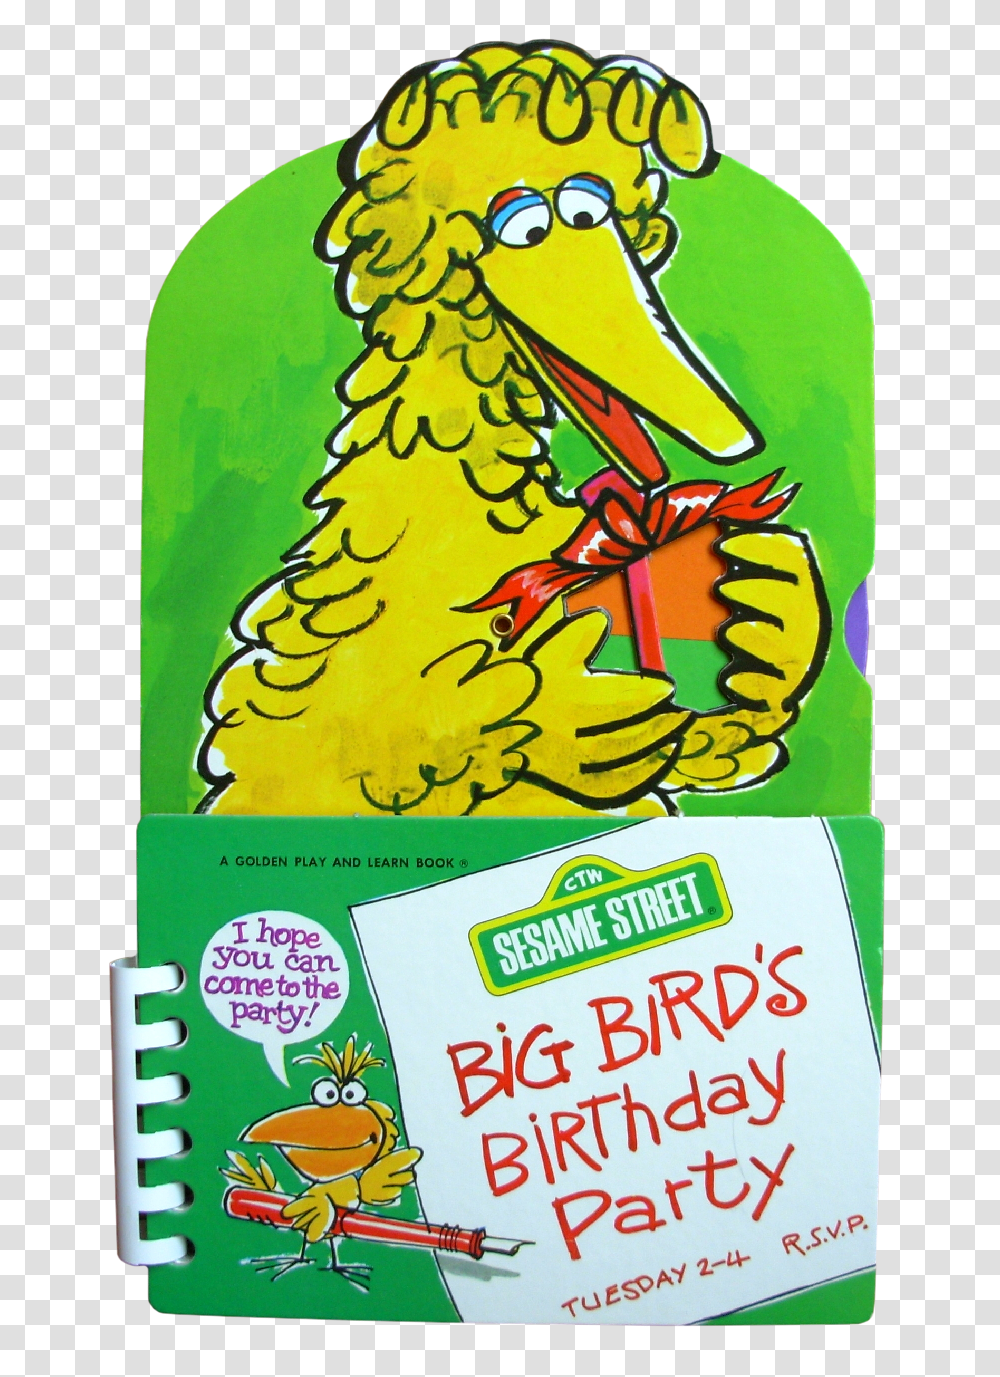 Big Birds Birthday Party, Tree, Plant, Ornament, Poster Transparent Png